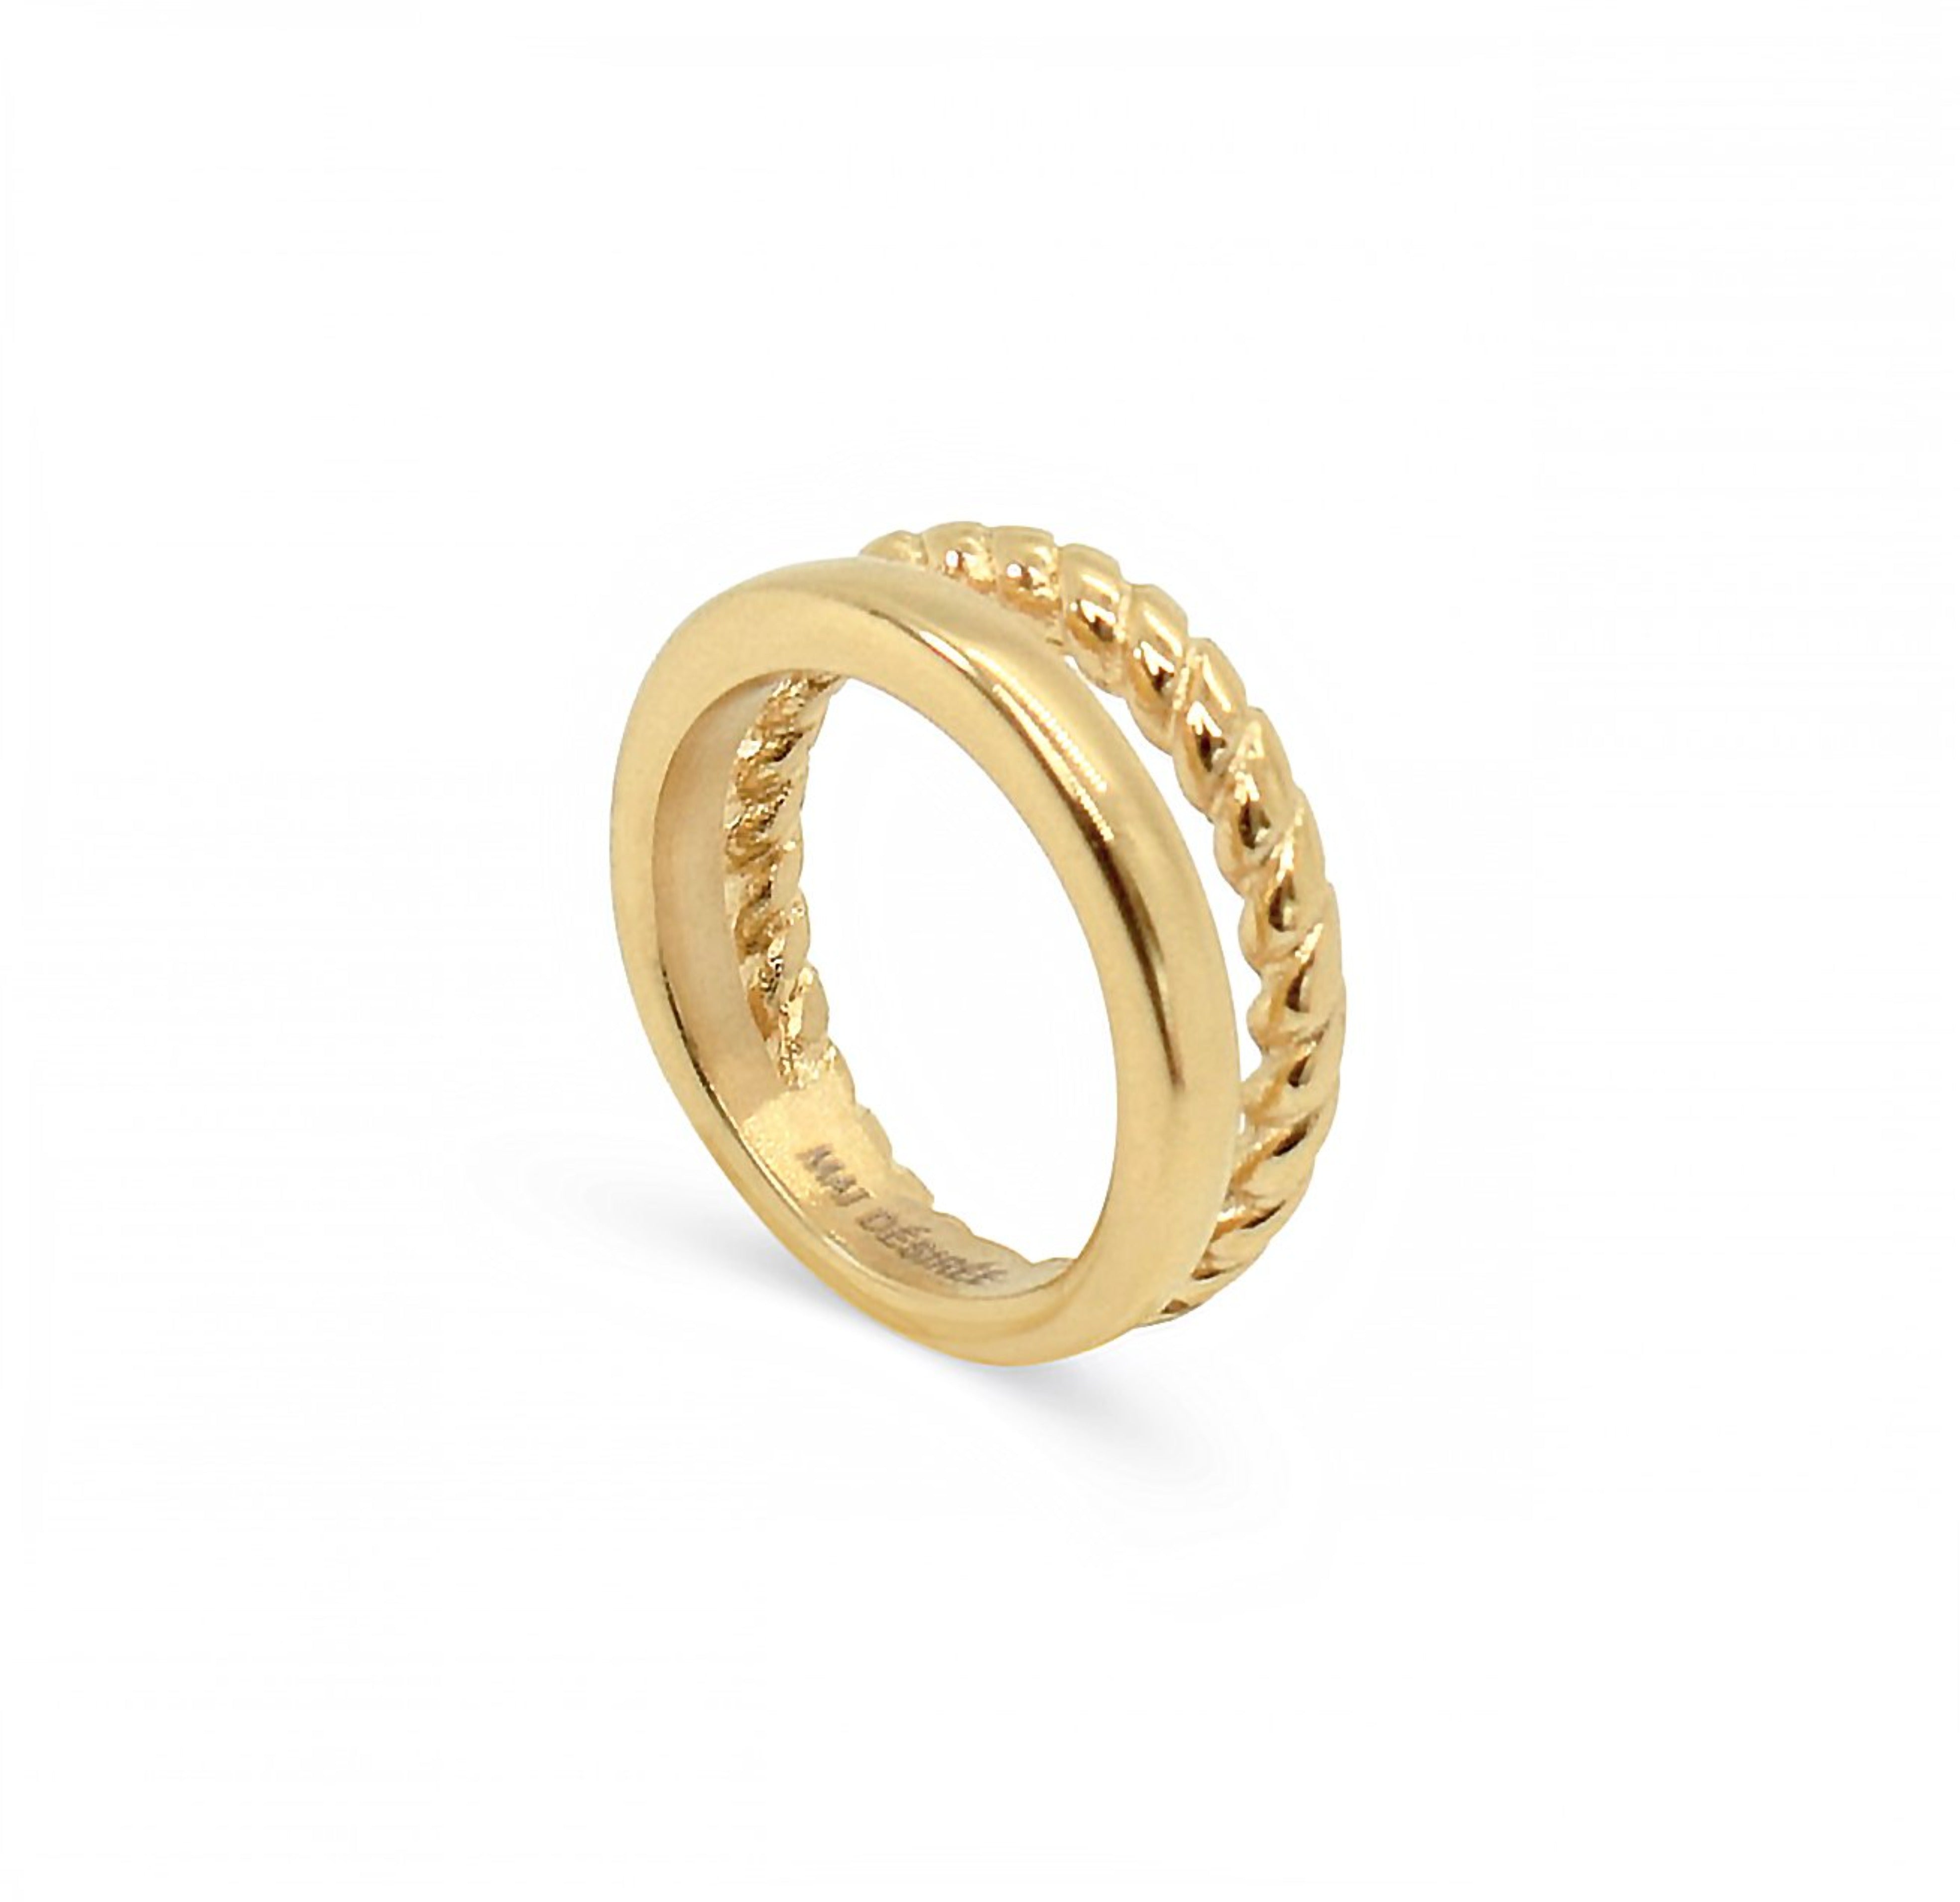 gold double ring band . The design gives the illusion of a gold band with a twist gold band worn together. waterproof rings